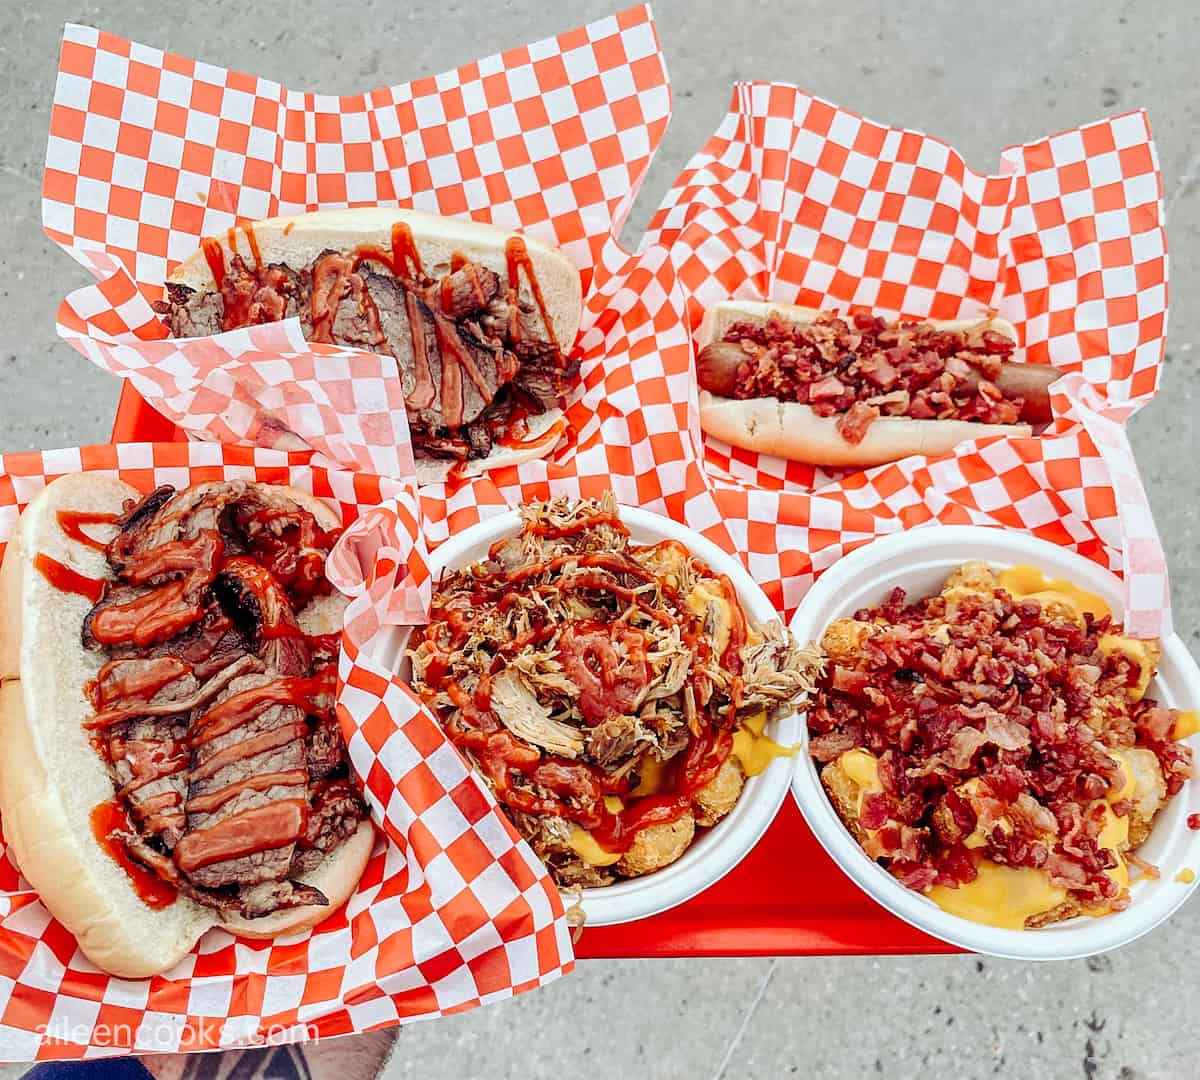 A red tray filled with a variety of barbecue items including pulled pork bowls and bacon topped hot dogs.